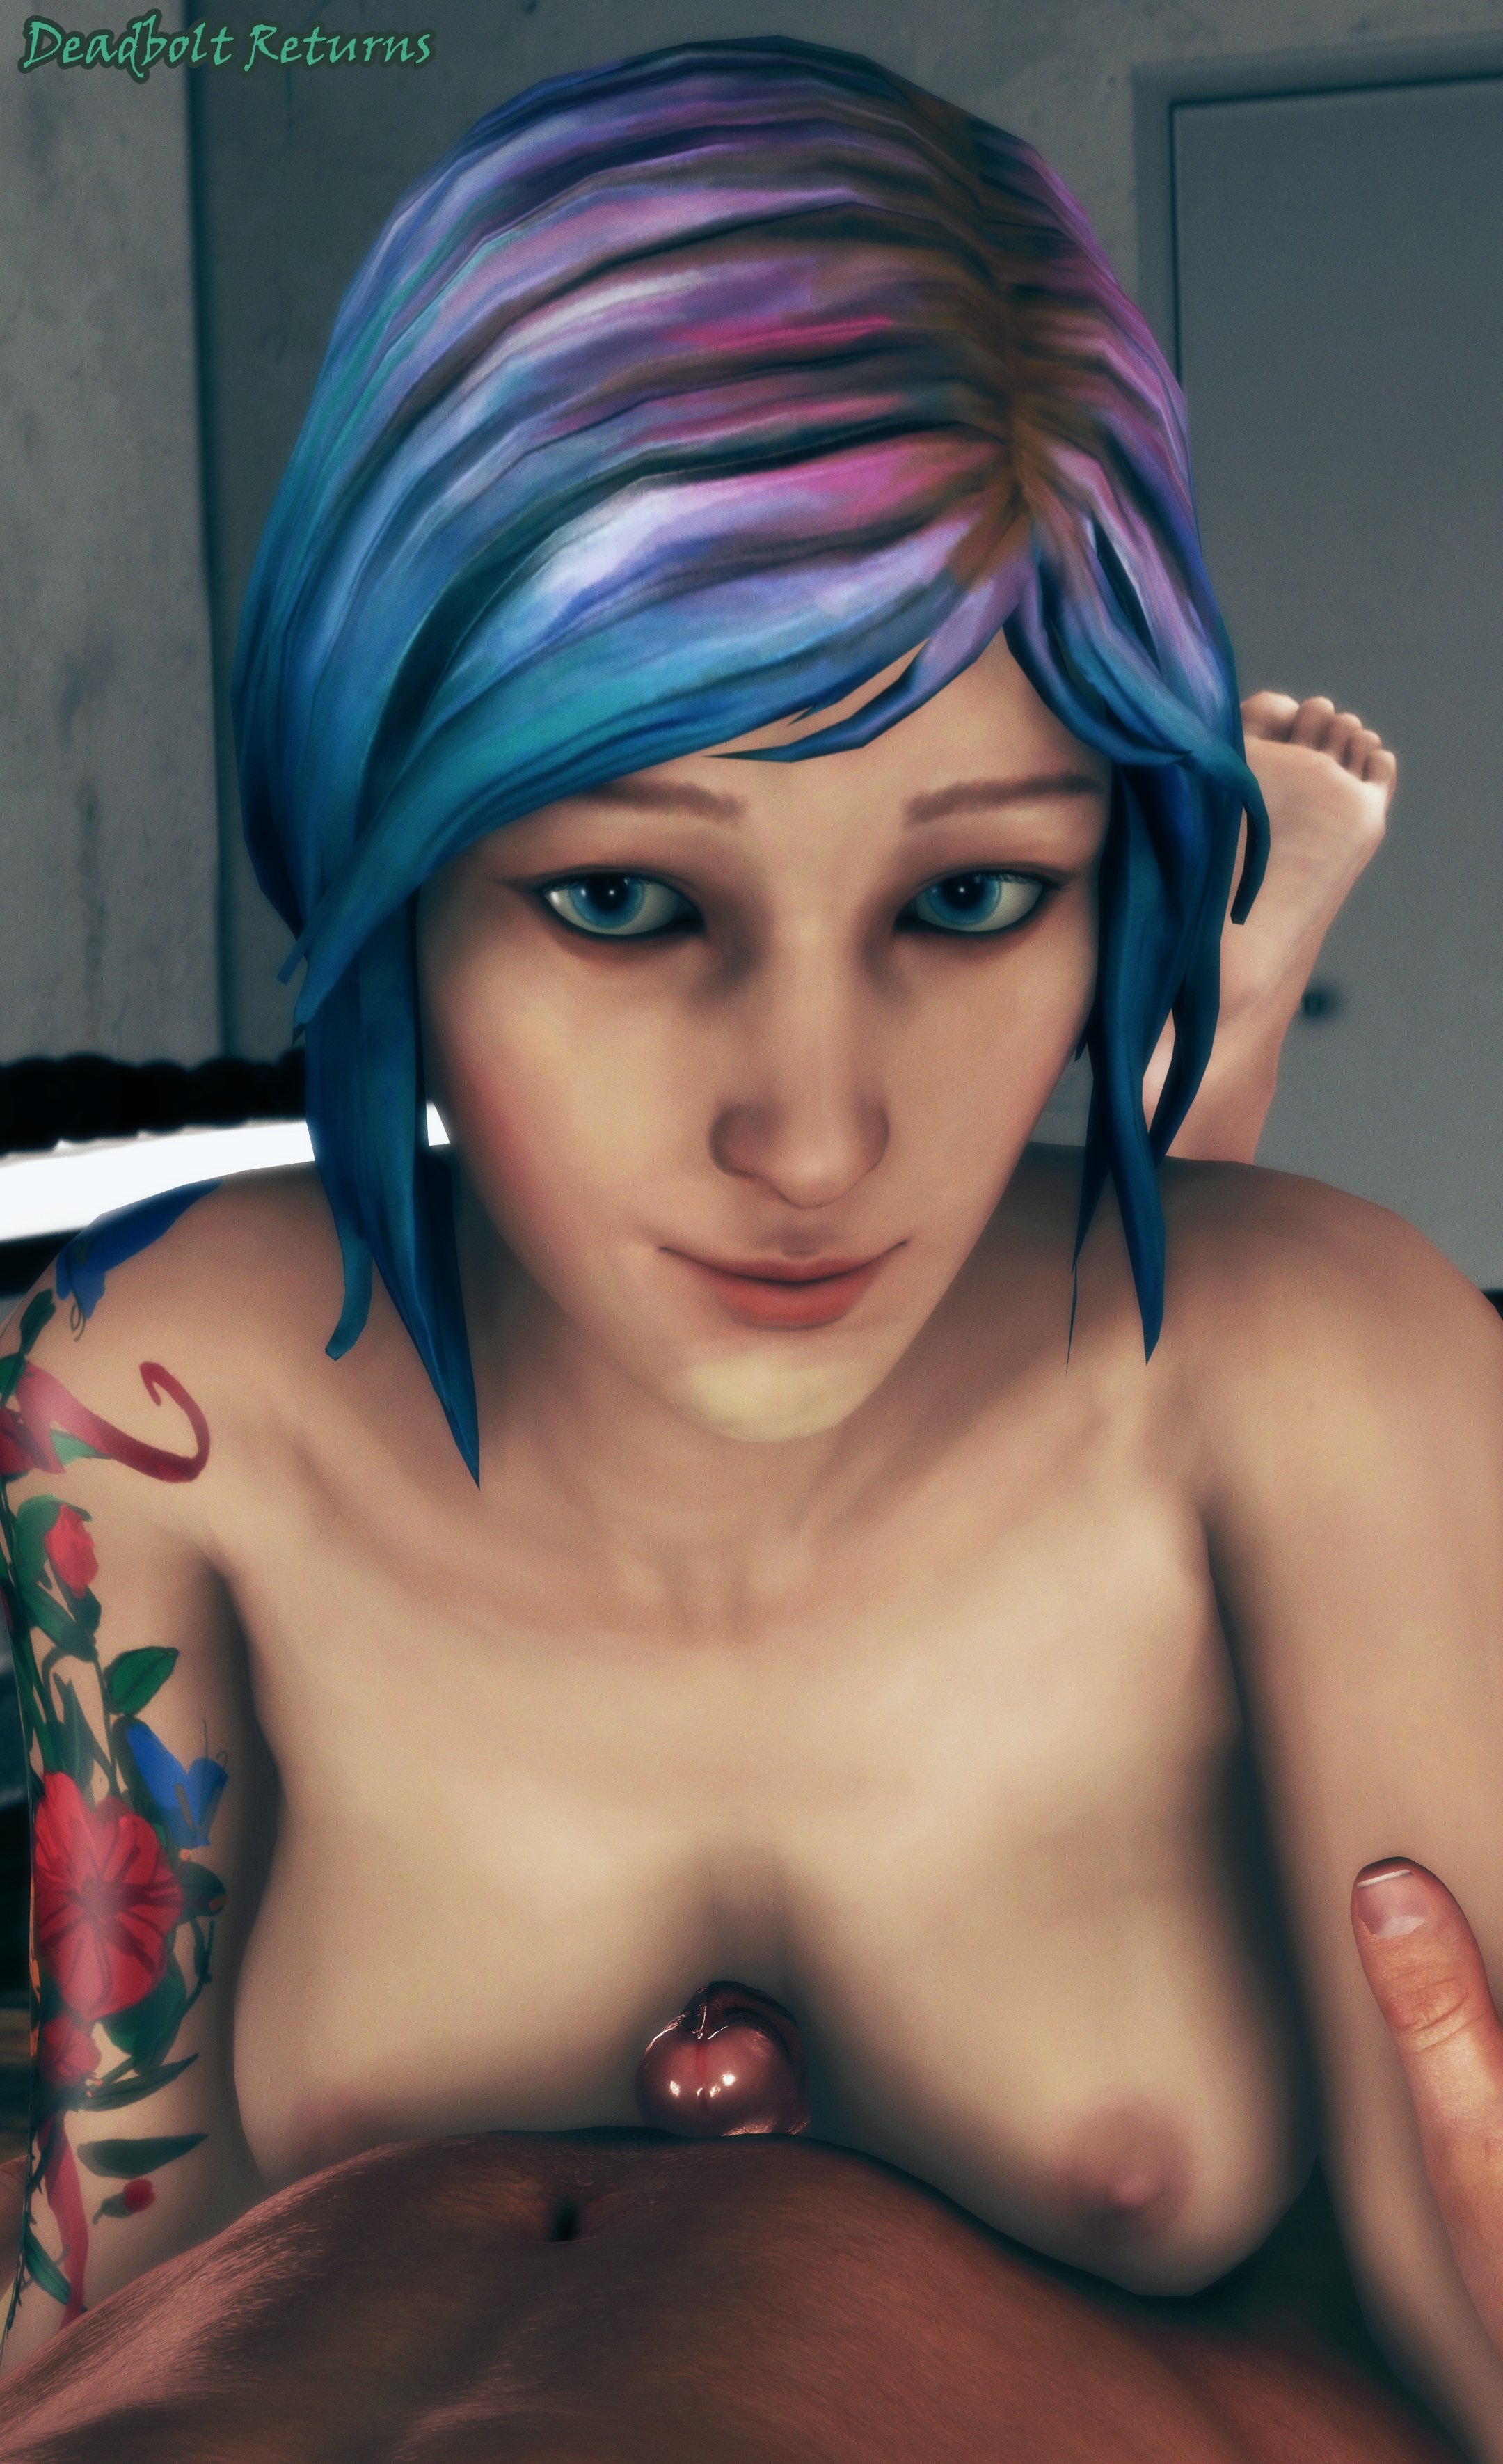 Chloe Price Returns to the Casting Couch Chloe Price Chloe Life Is Strange Sfm Source Filmmaker Rule34 Rule 34 3d Porn 3d Girl 3dnsfw Nsfw Casting Couch 11